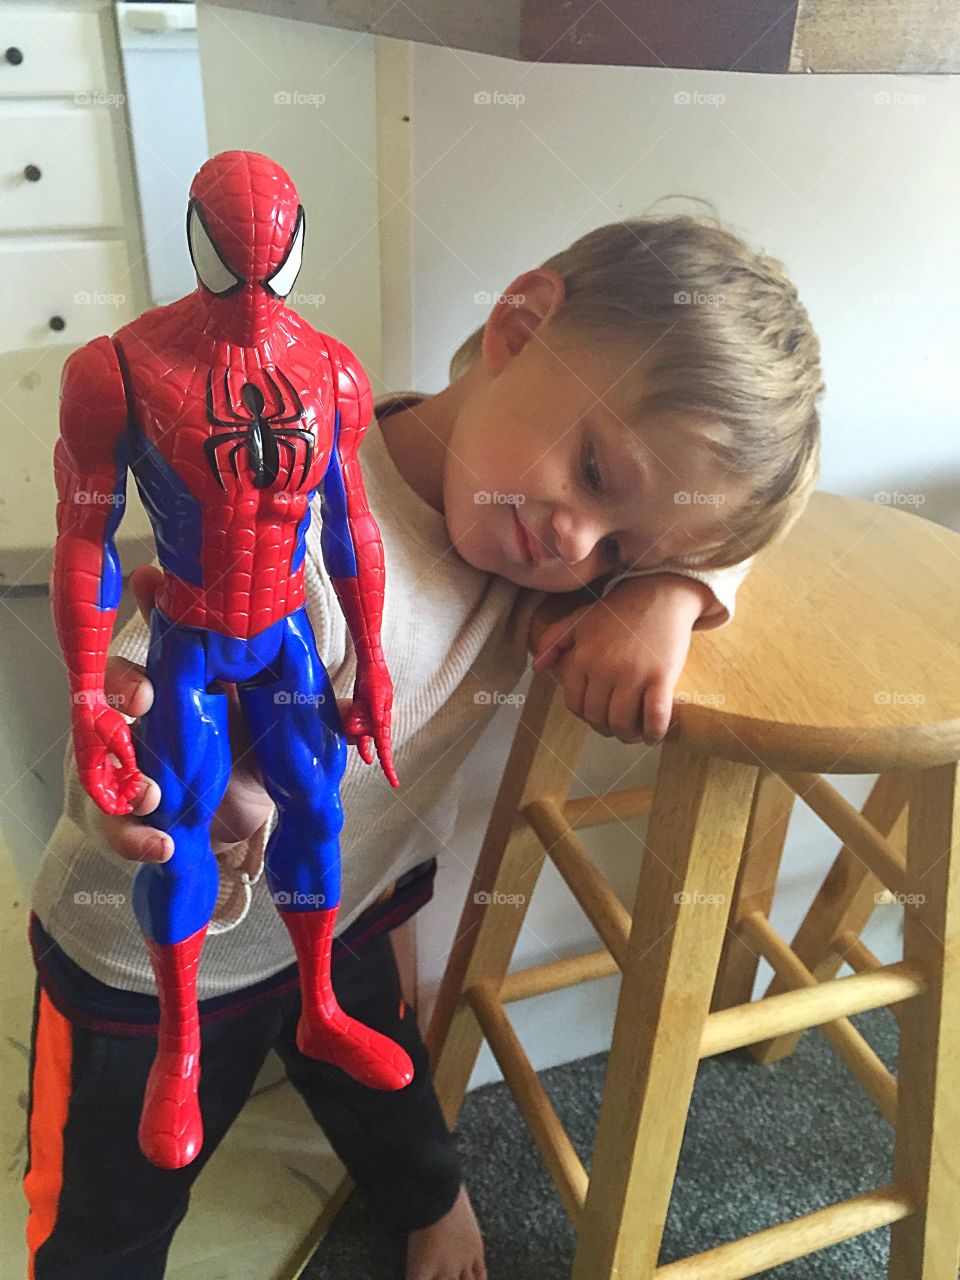 Small boy holding Spiderman toy